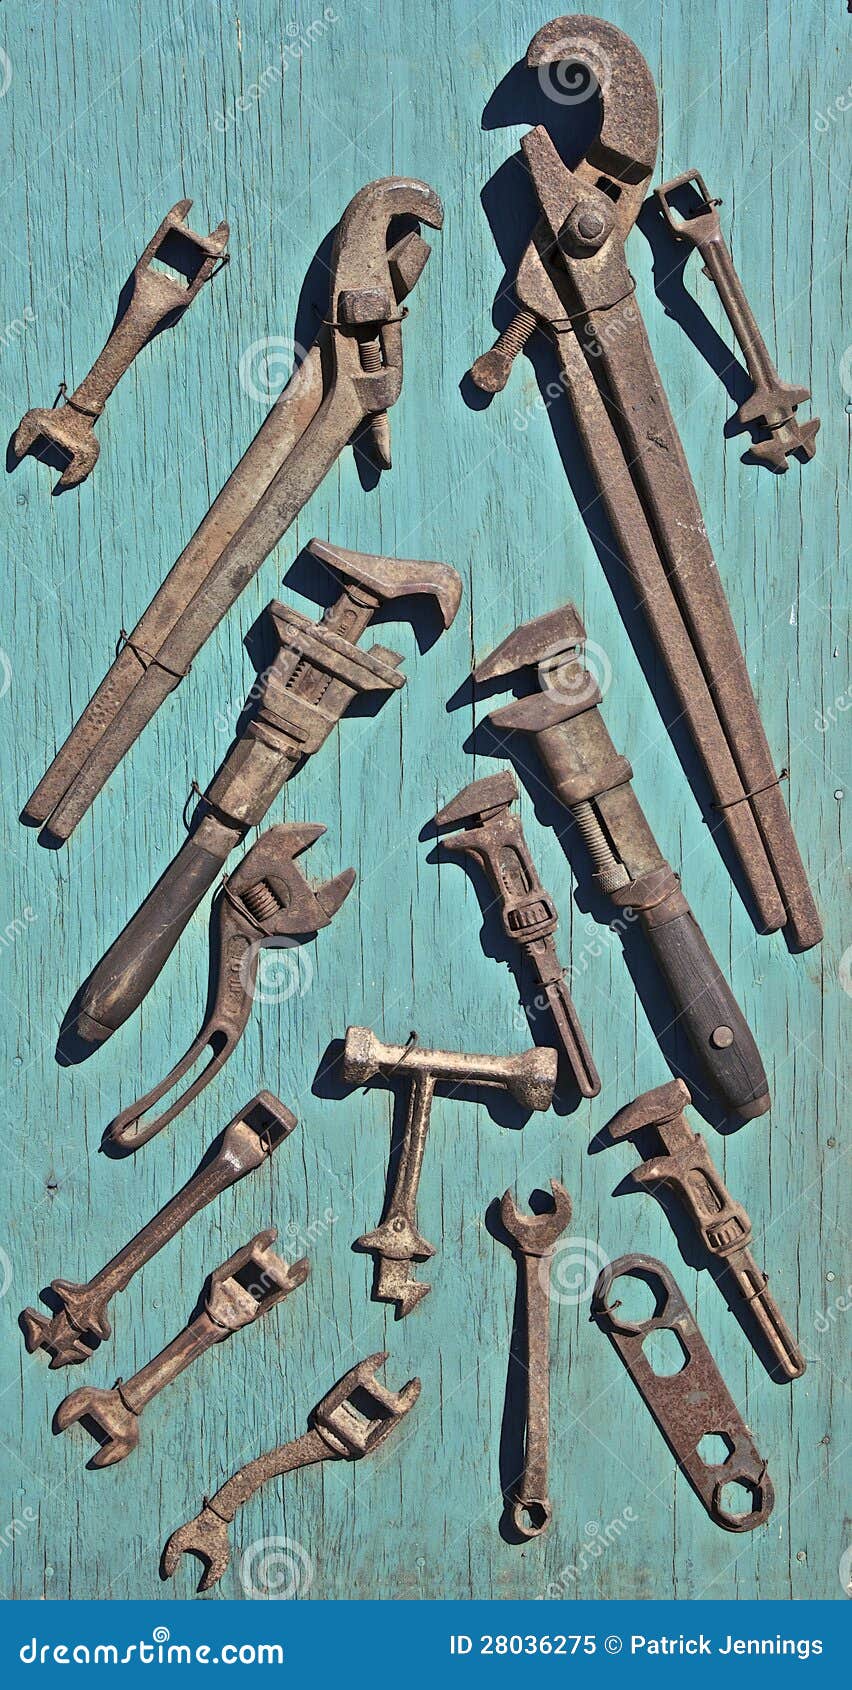 Old Rusty Tools stock image. Image of hammer, tools, spanner - 28036275